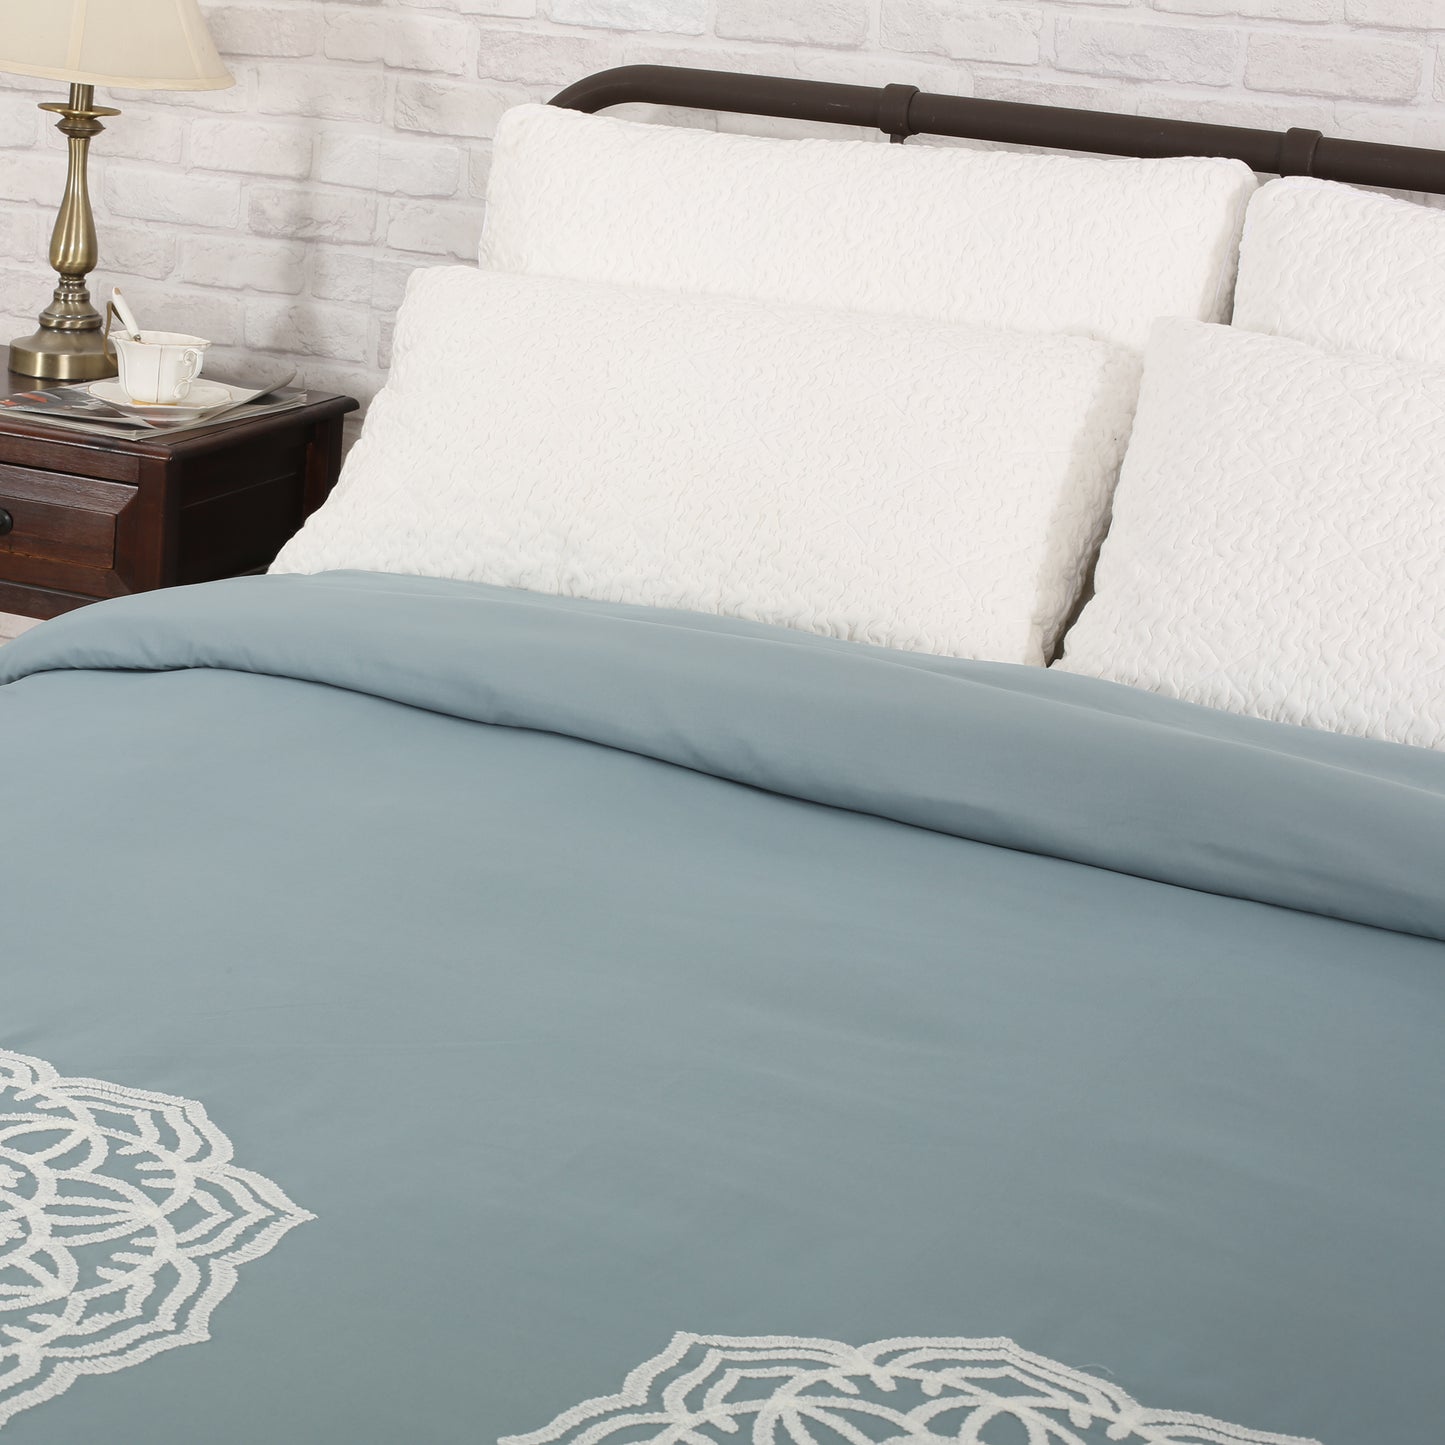 Liliana Queen Size Fabric Duvet Cover